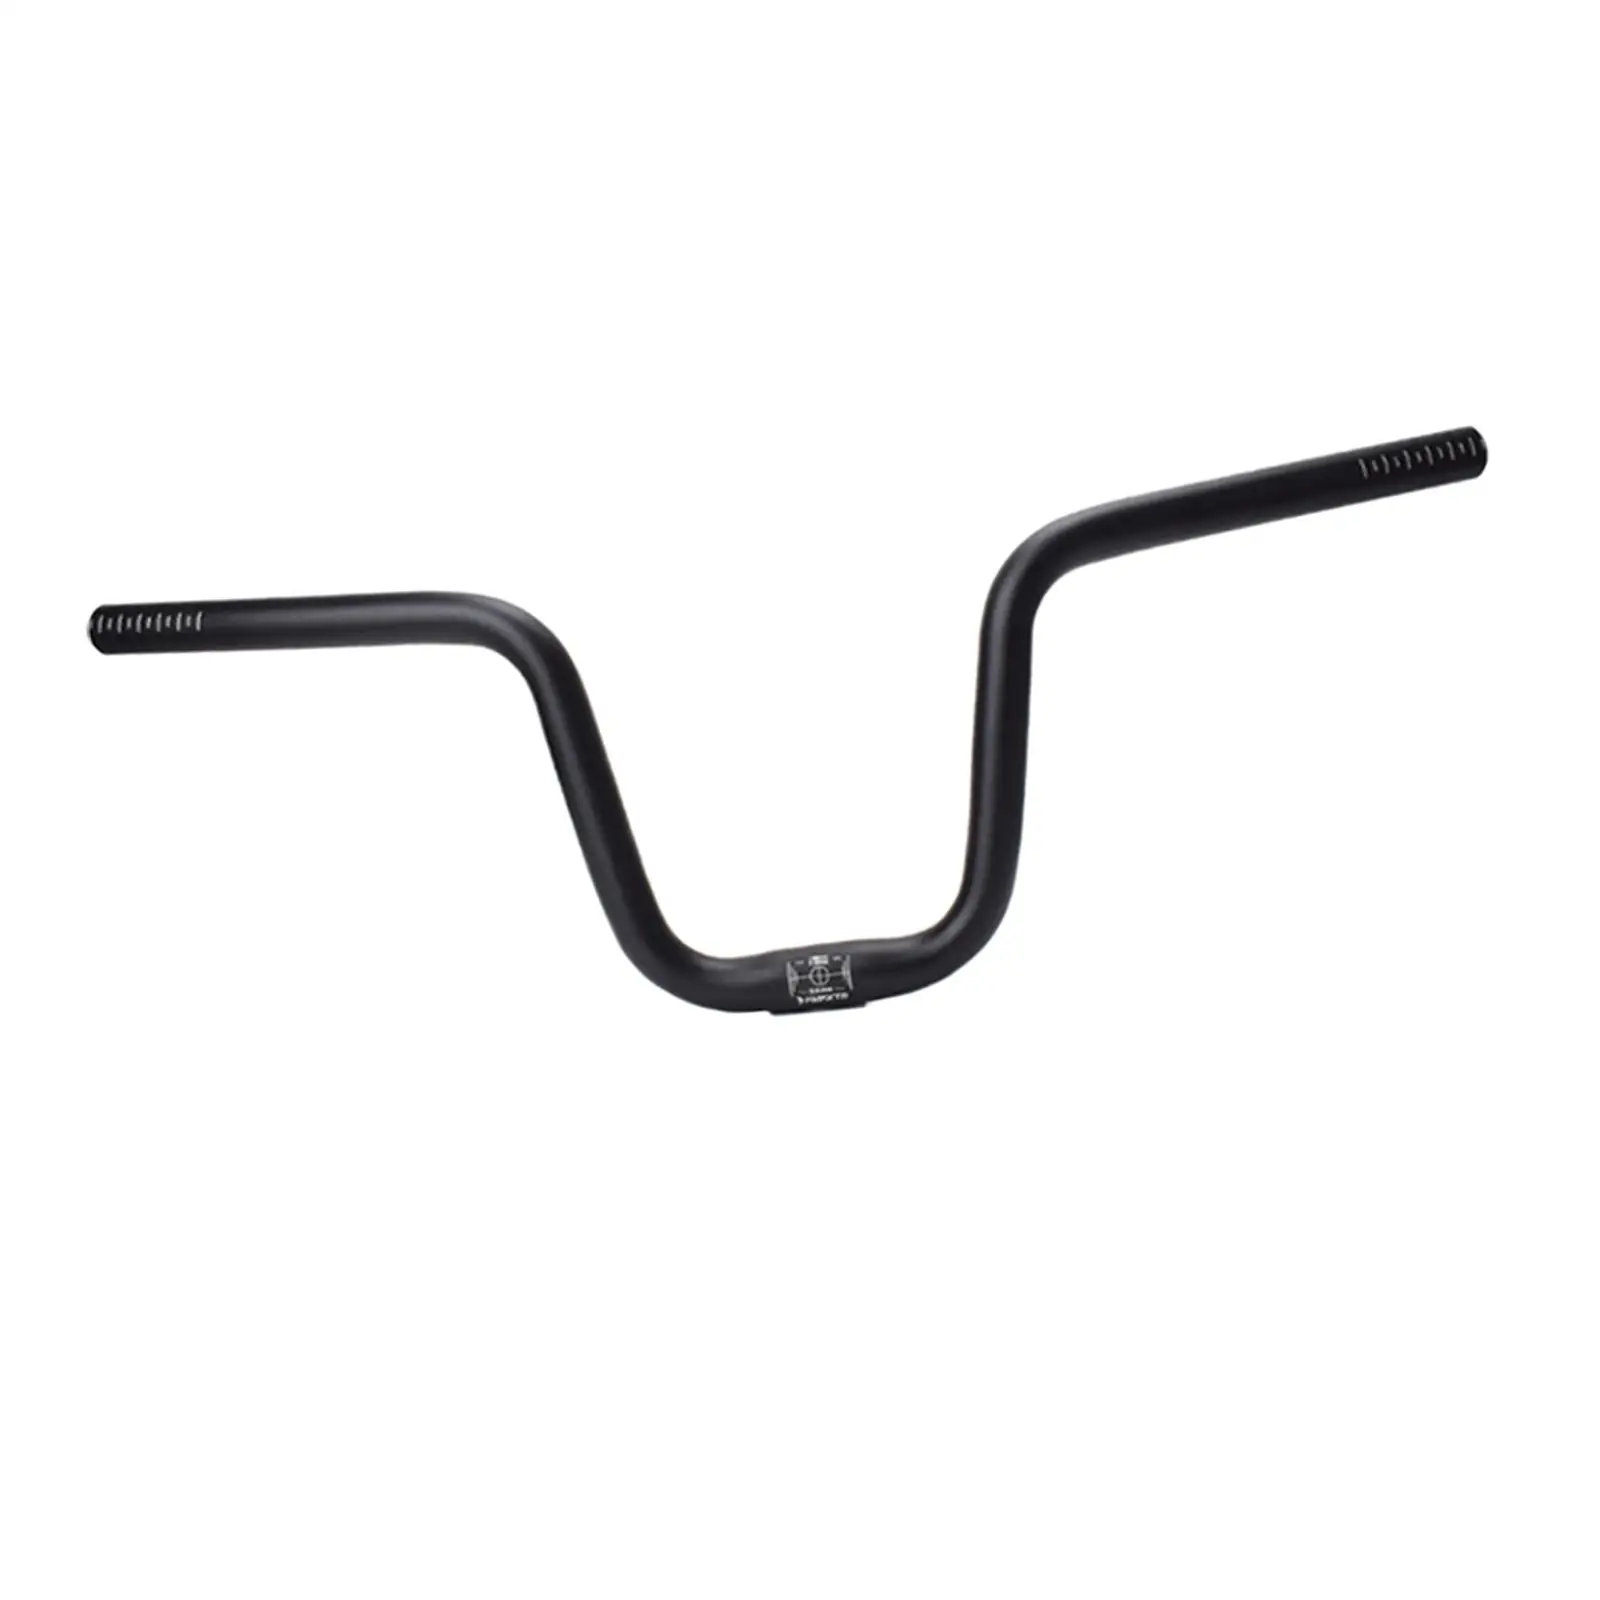 Folding Bike Handlebar Cycling Handle Bar 25.4mm Clamp Accessories 22.2mm for Road Bike BMX Outdoor Activities Riding